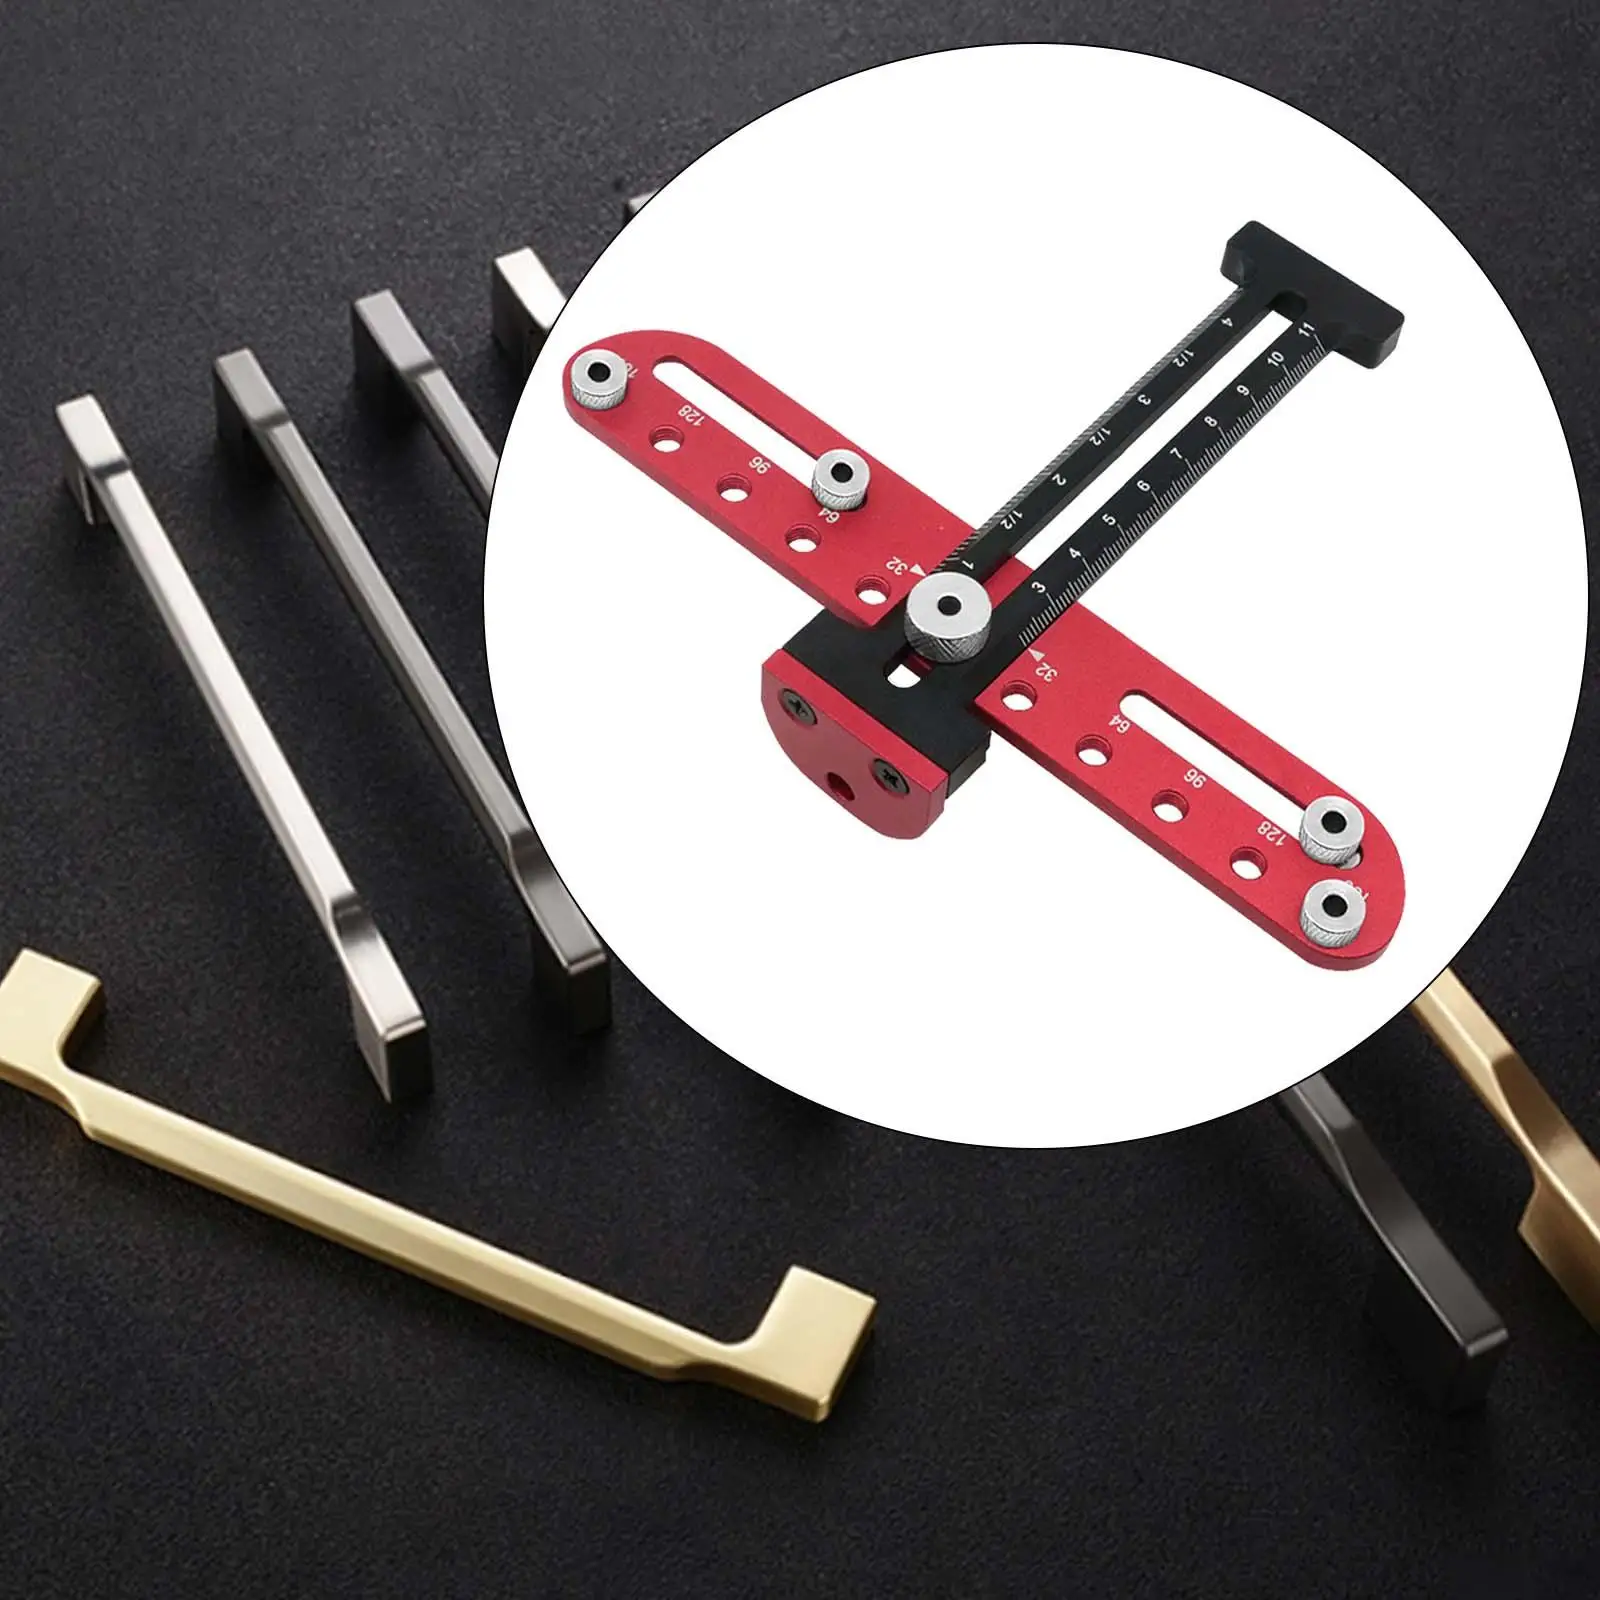 Drill Hole Punch Jig, Punch , Cabinet Drawer Handle Hole Drill Guide Sleeve Woodworking Tools, Wardrobe Hole Punch